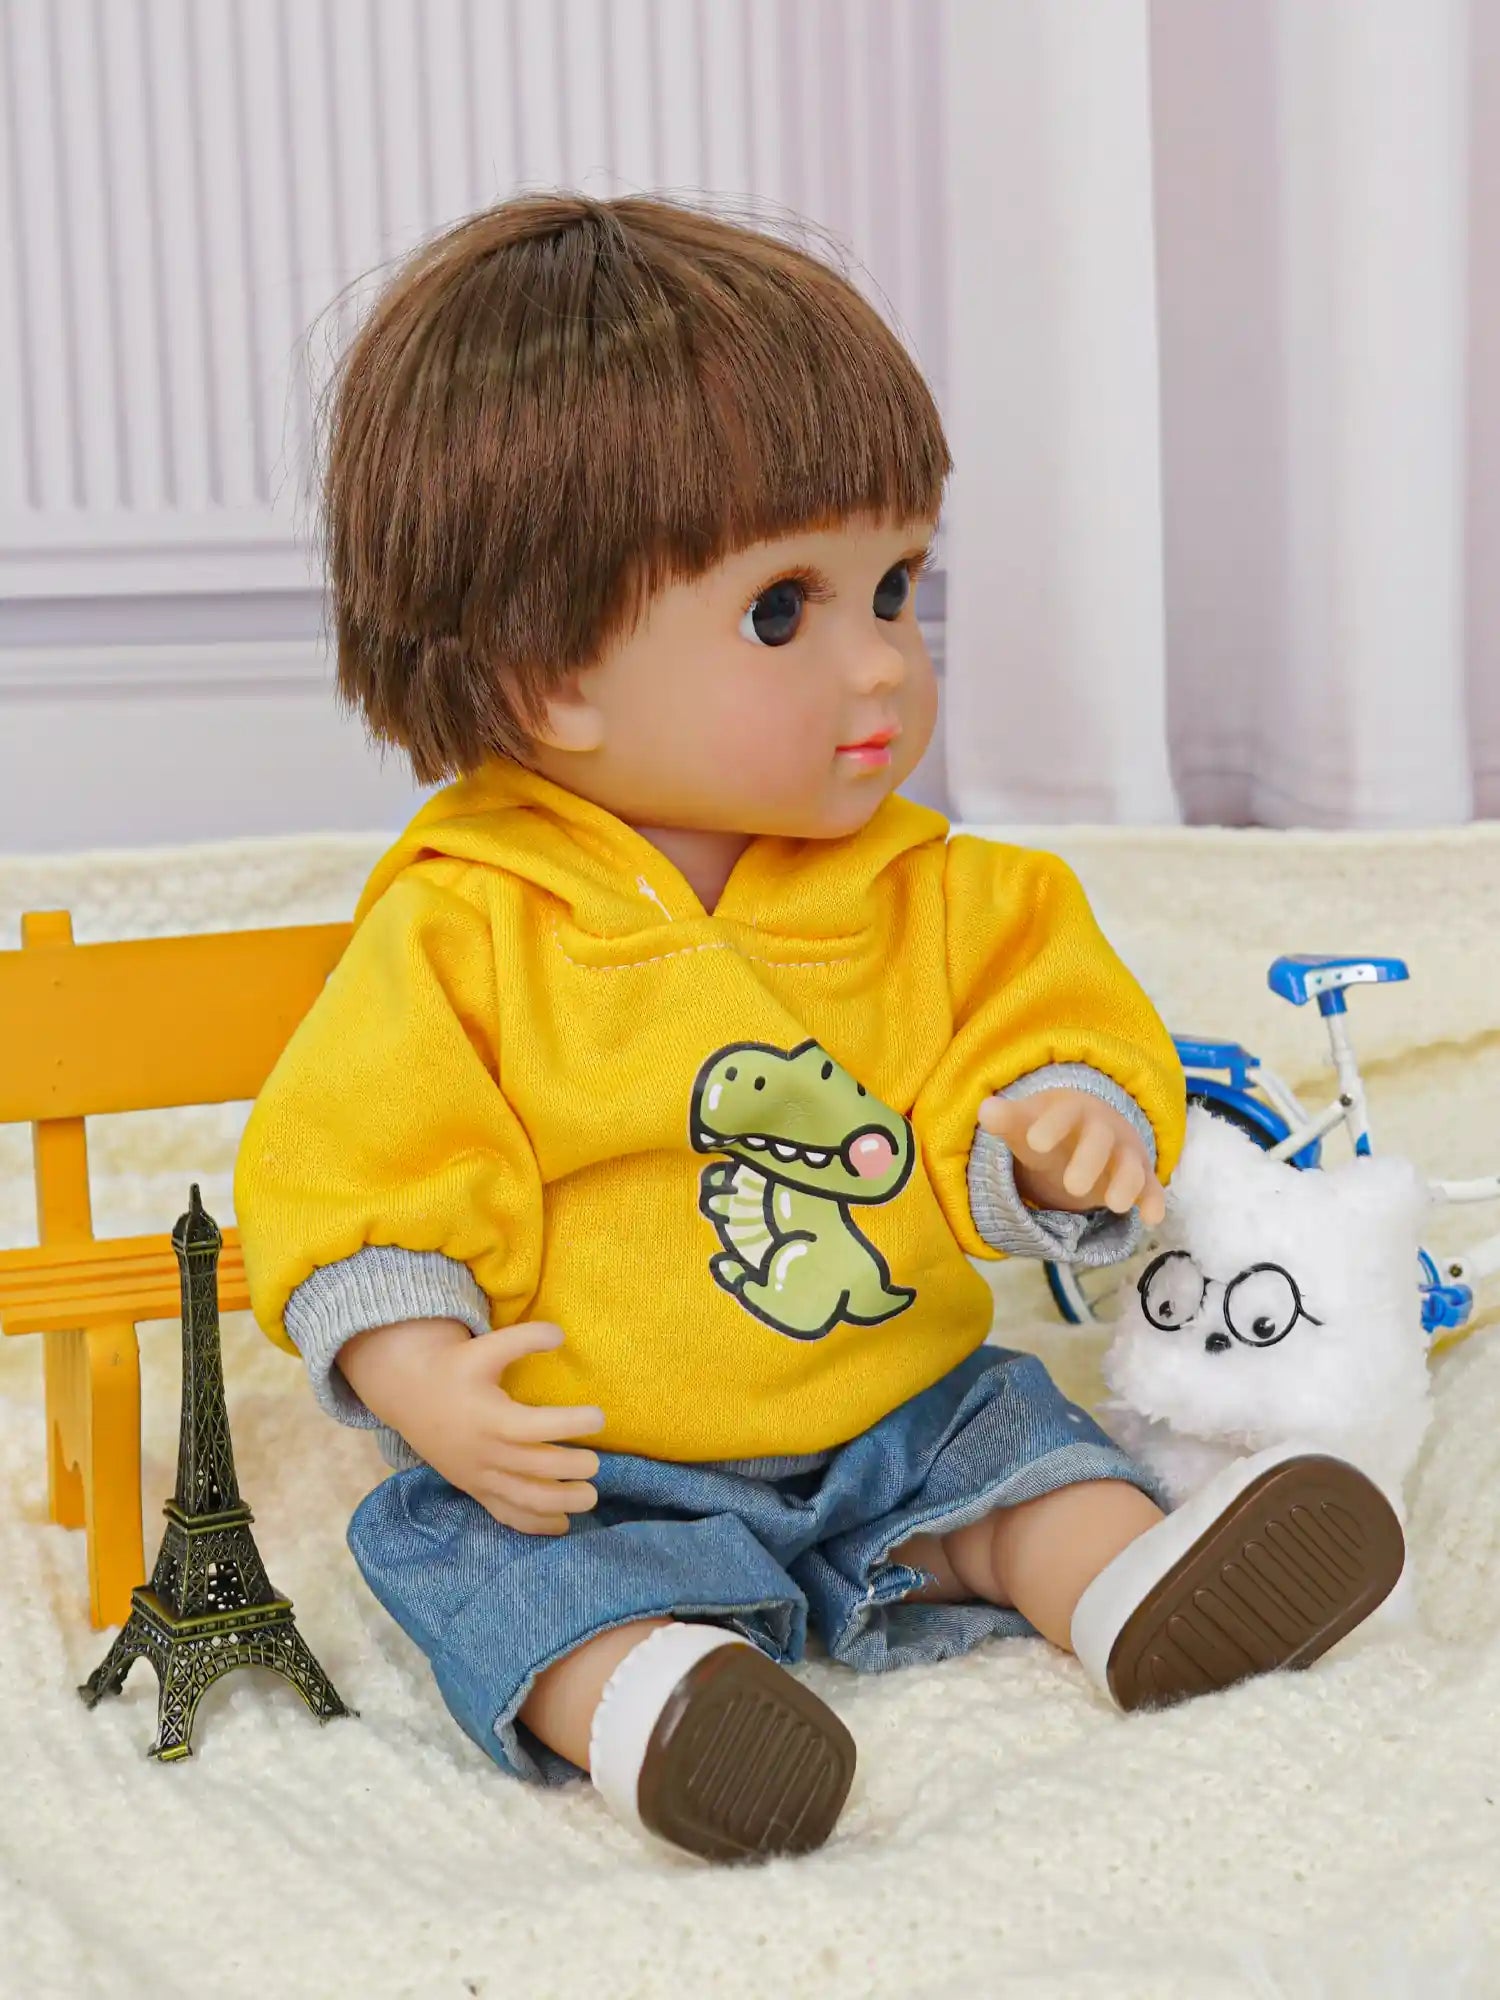 Childlike doll sitting with a yellow top, blue shorts, white dog toy, and a small bike.